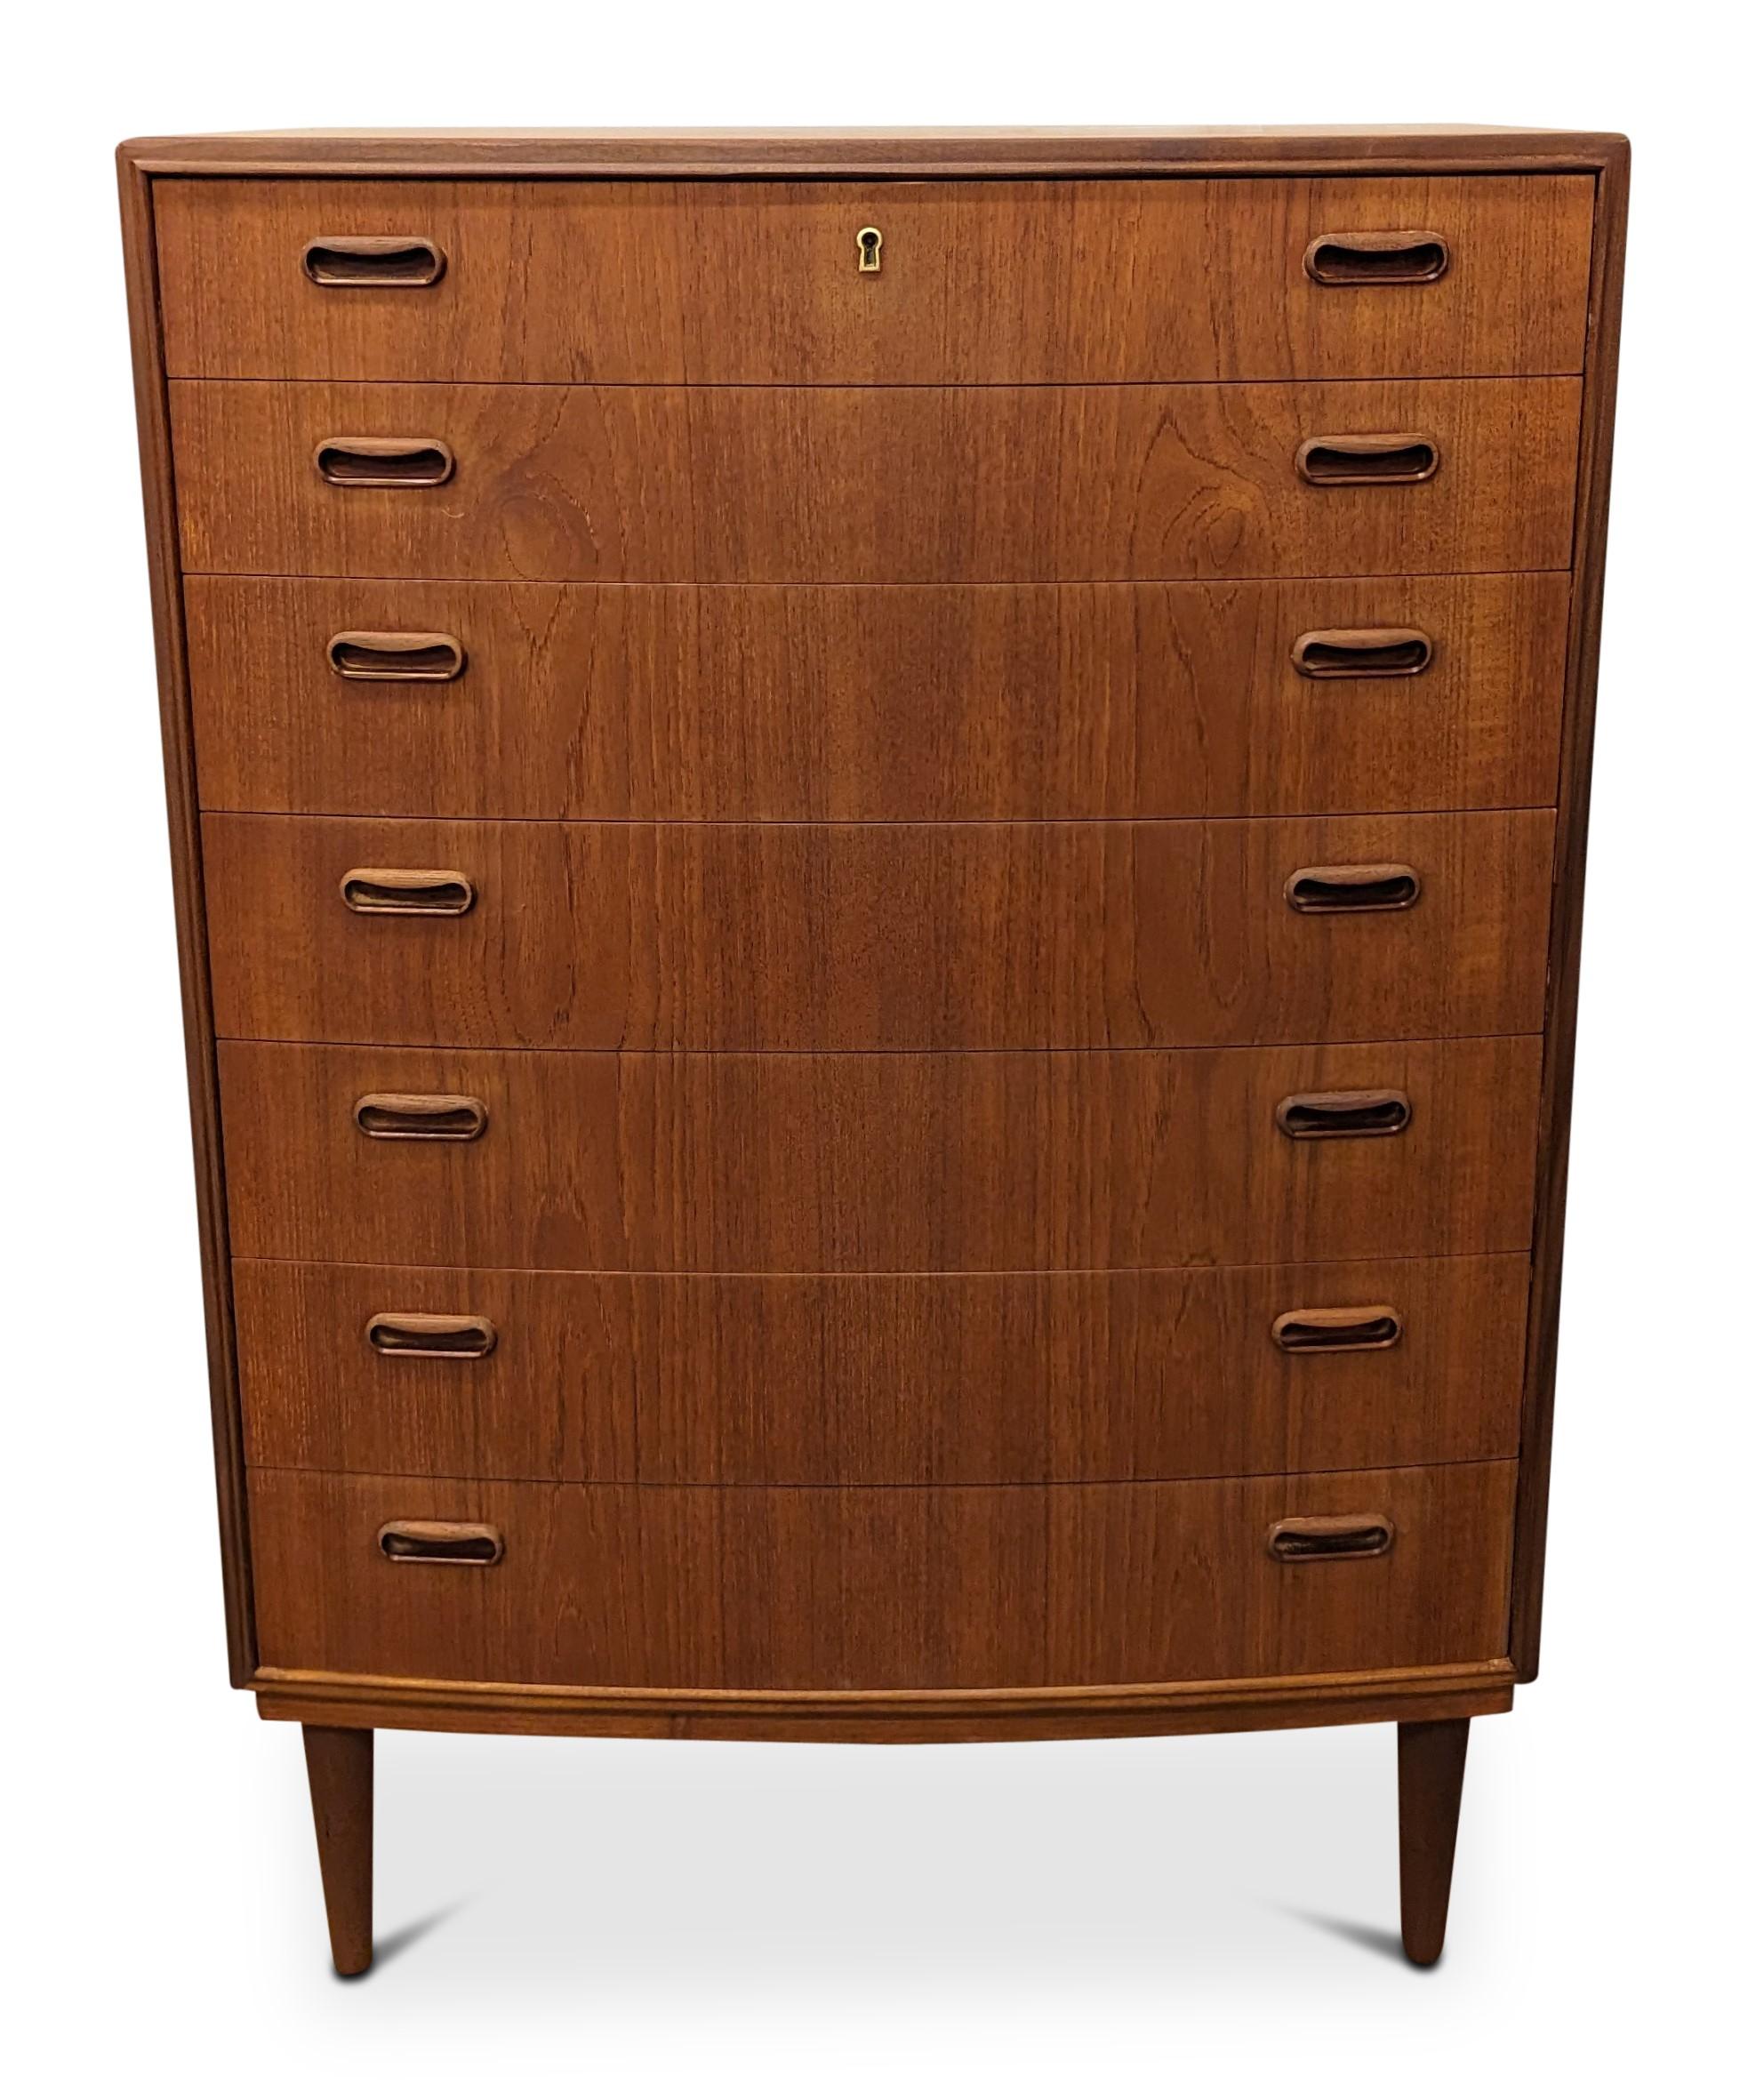 Vintage Danish mid-century modern, made in the 1950's - Recently refurbished

The piece is more than 65+ years old and some wear and tear can be expected, but we do everything we can to refurbish them in respect to the design.

There is a science